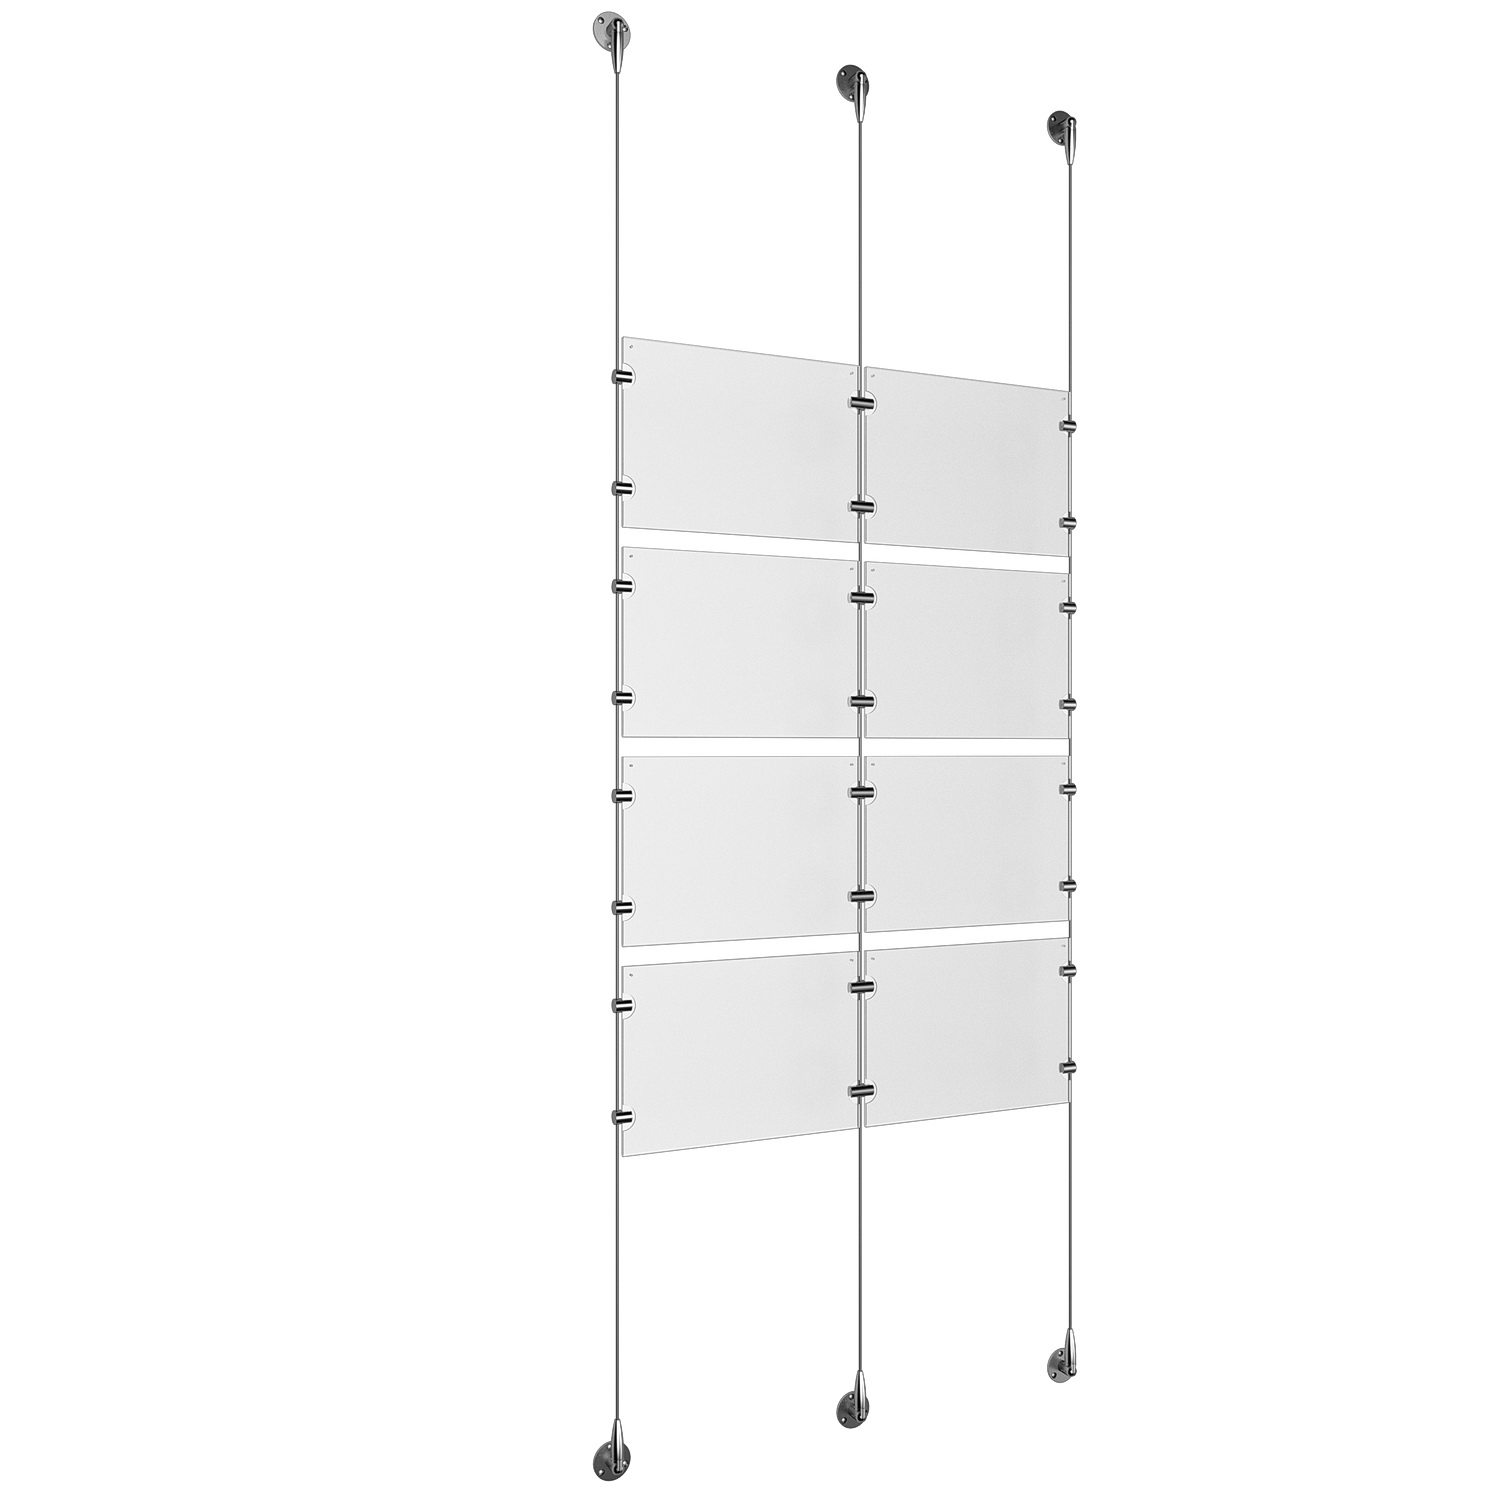 (8) 11'' Width x 8-1/2'' Height Clear Acrylic Frame & (3) Stainless Steel Satin Brushed Adjustable Angle Signature 1/8'' Cable Systems with (16) Single-Sided Panel Grippers (8) Double-Sided Panel Grippers